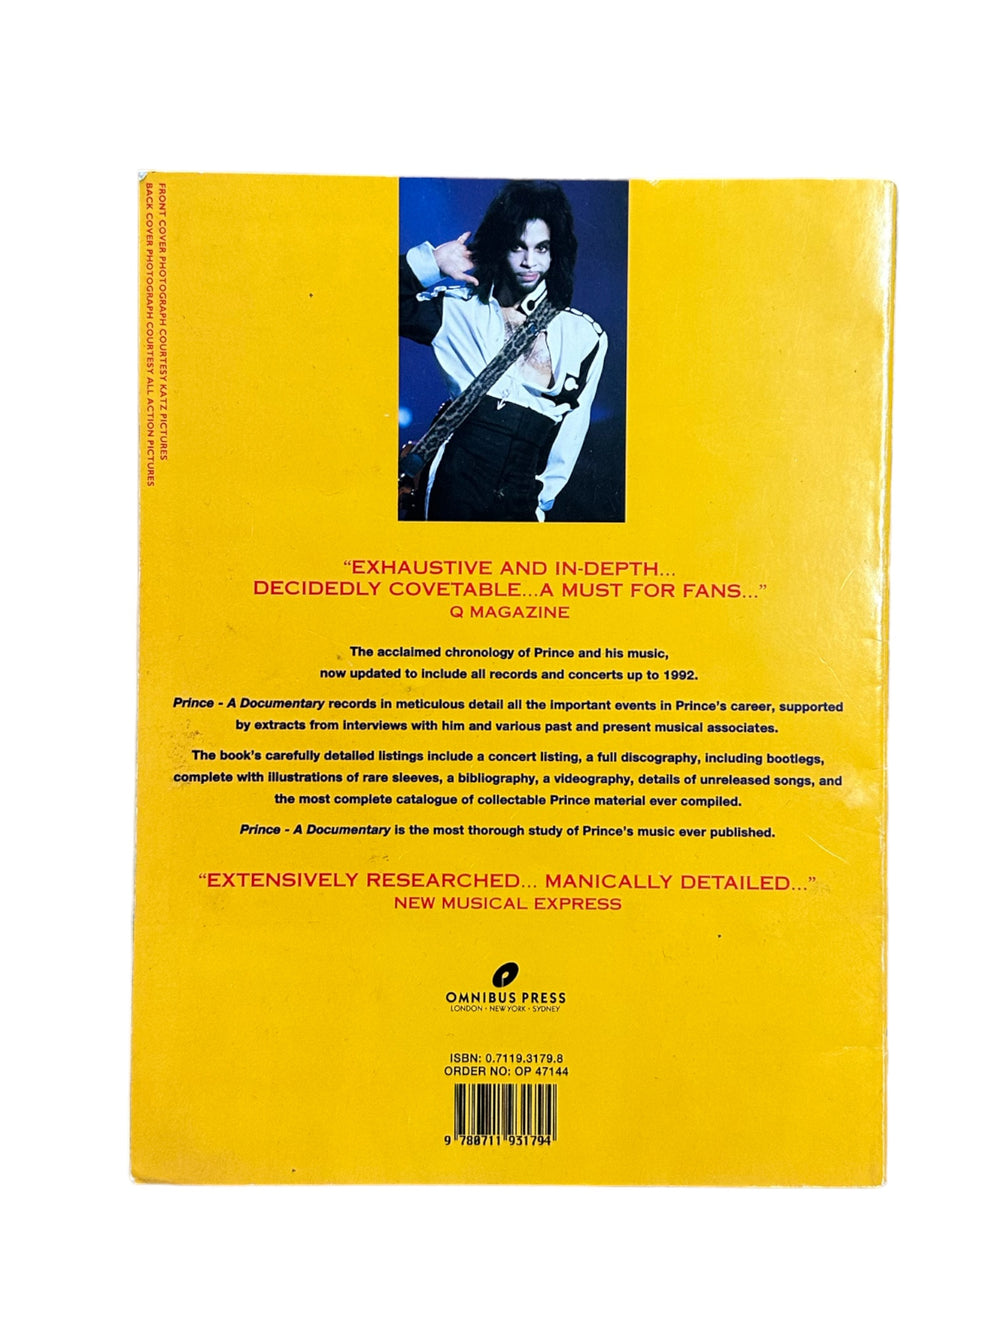 Prince – A Documentary (Updated 1993 Version) Paperback Softback Book 127 Pages Per Nilsen